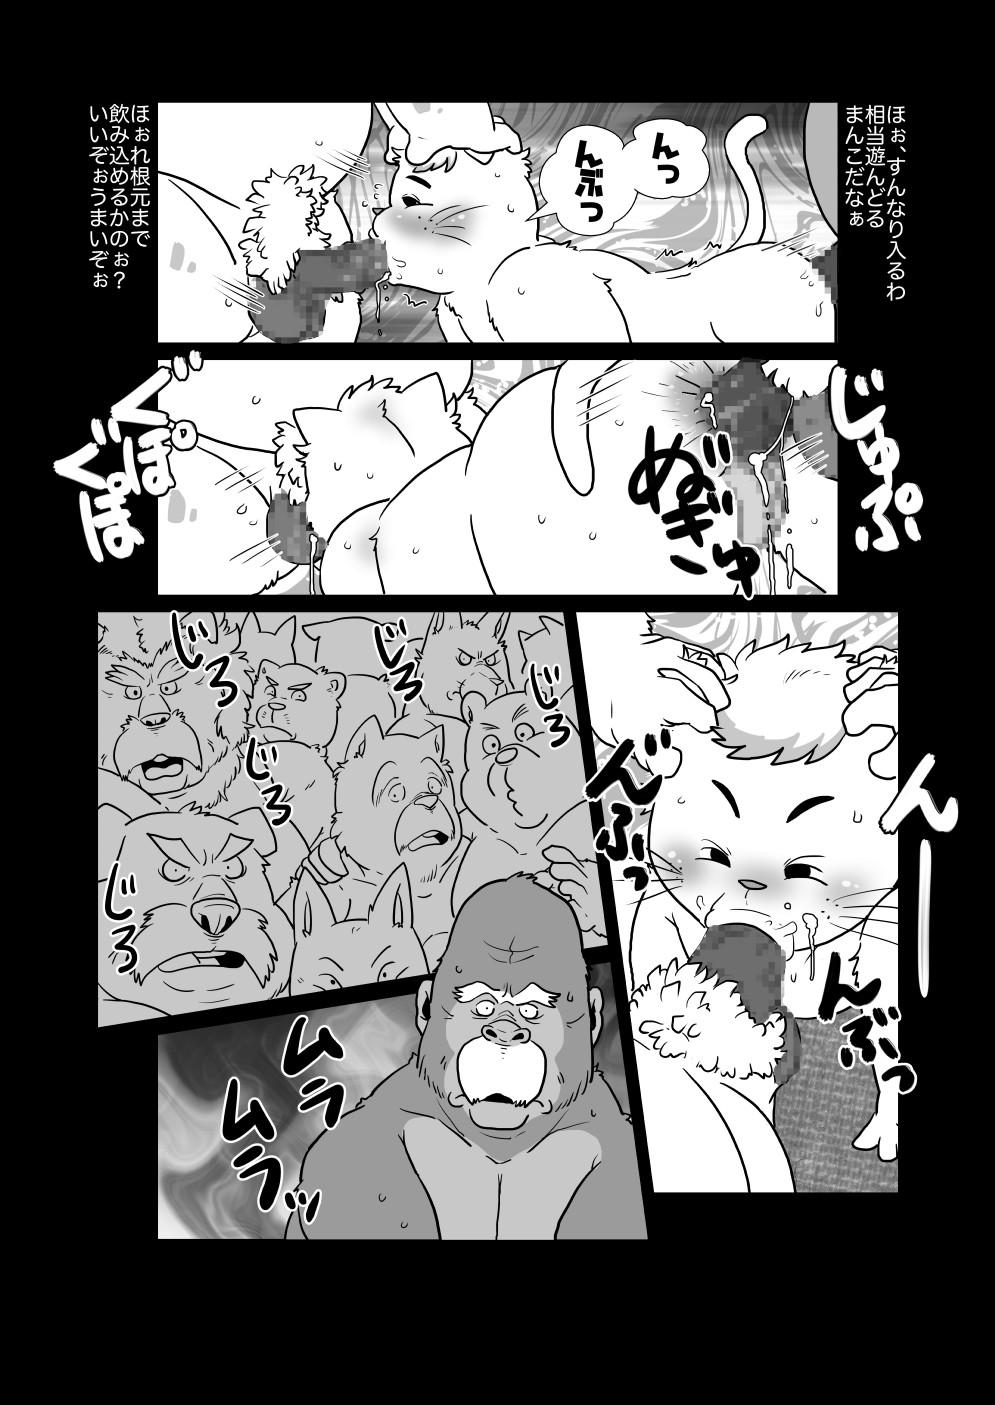 Mom 【ハッテンビーチ】ふぃすとふぁっく【ケモホモ注意】 Parties - Page 12